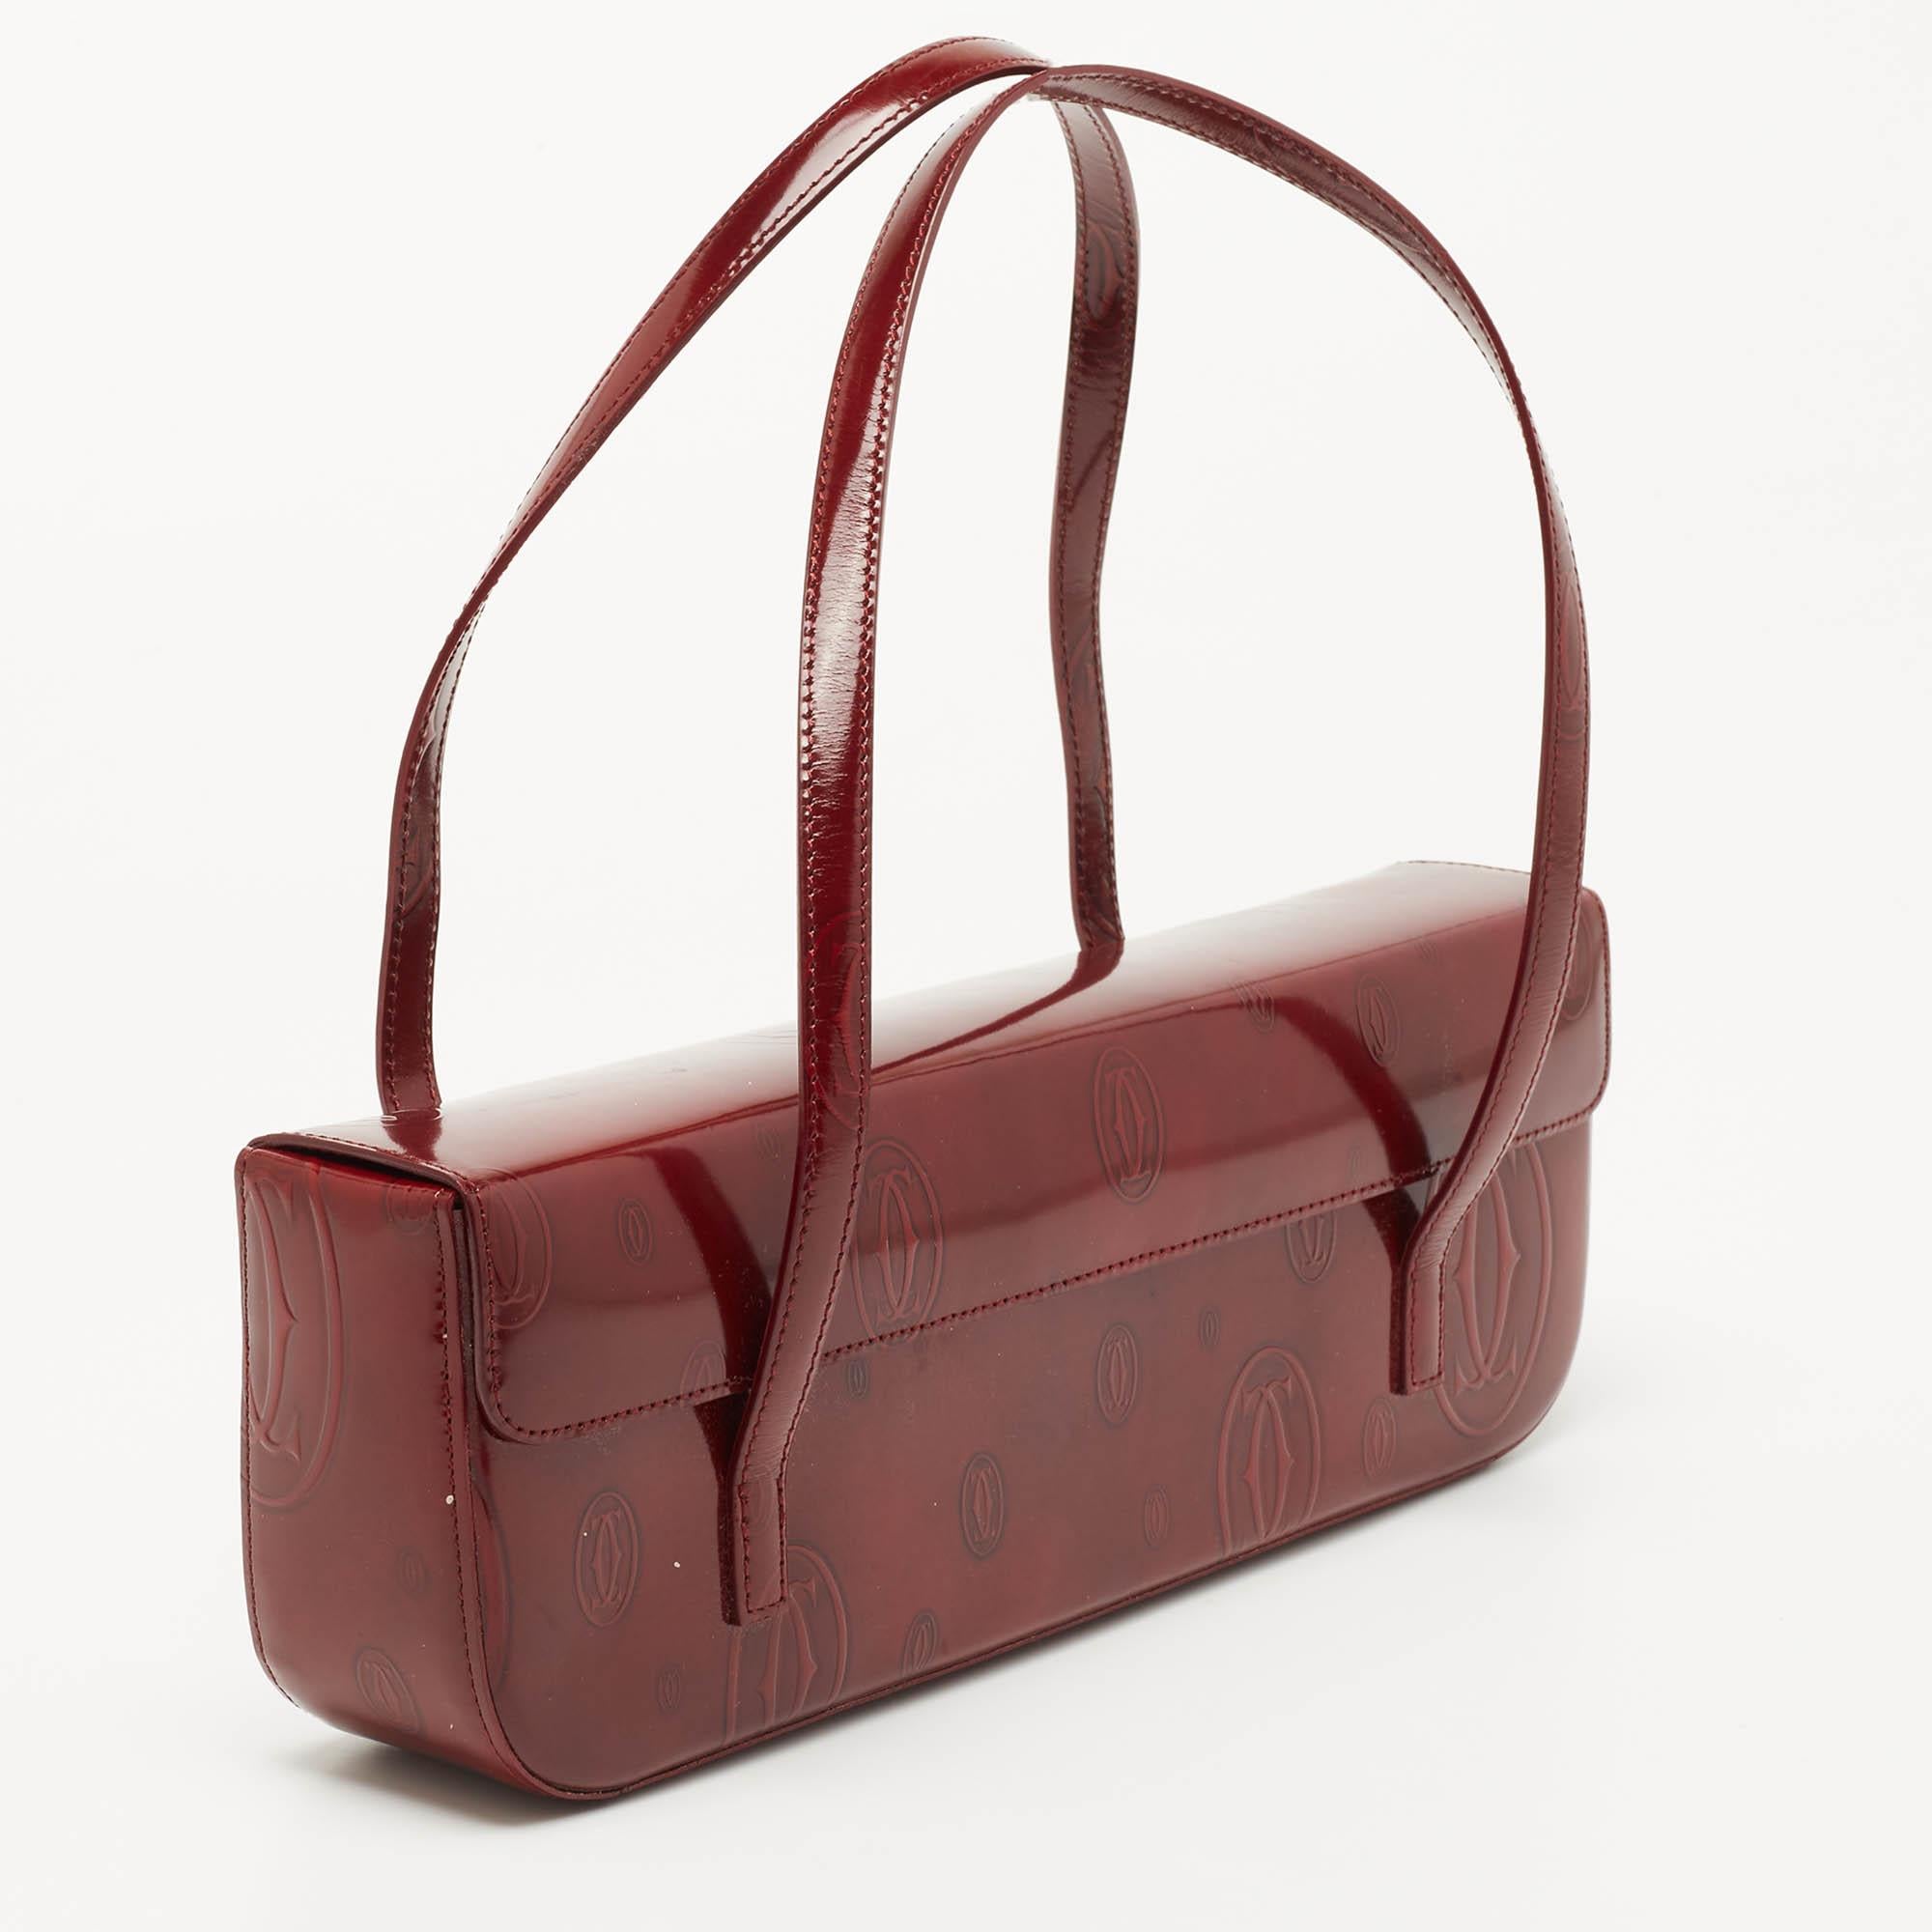 Cartier Red Gloss Leather Happy Birthday Cabochon Shoulder Bag 2